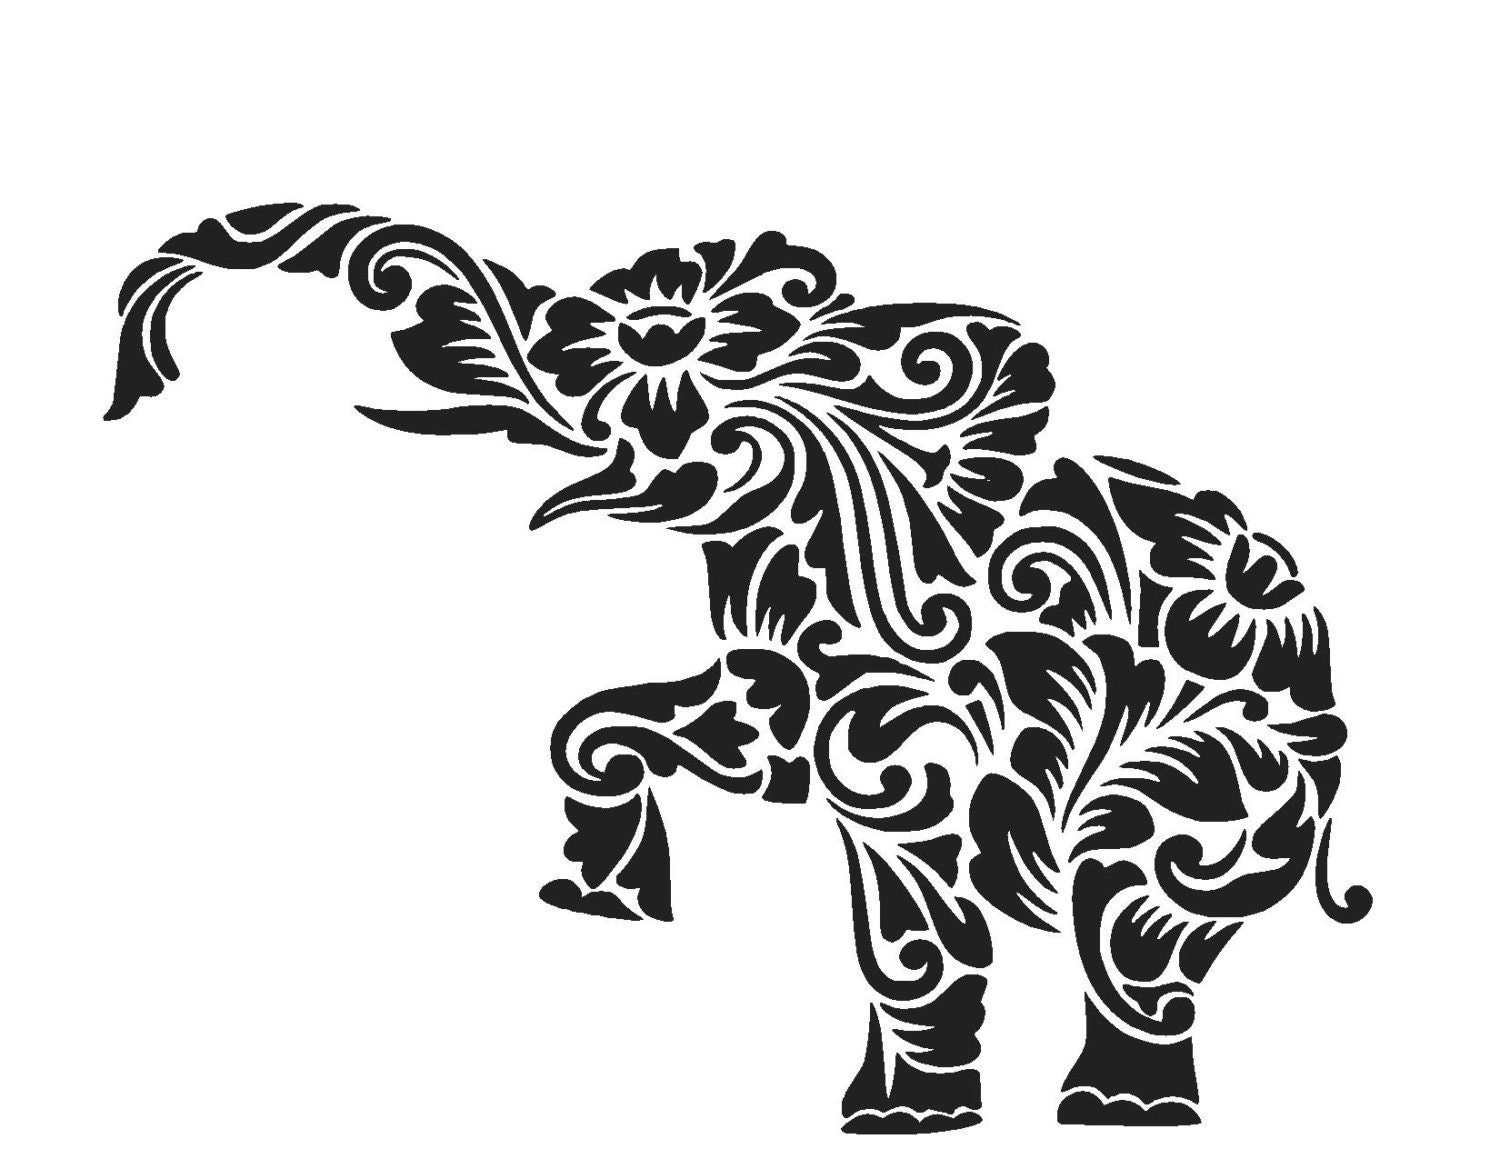 Download Alabama Floral Elephant Silhouette or SVG Instant by MandaNoelle